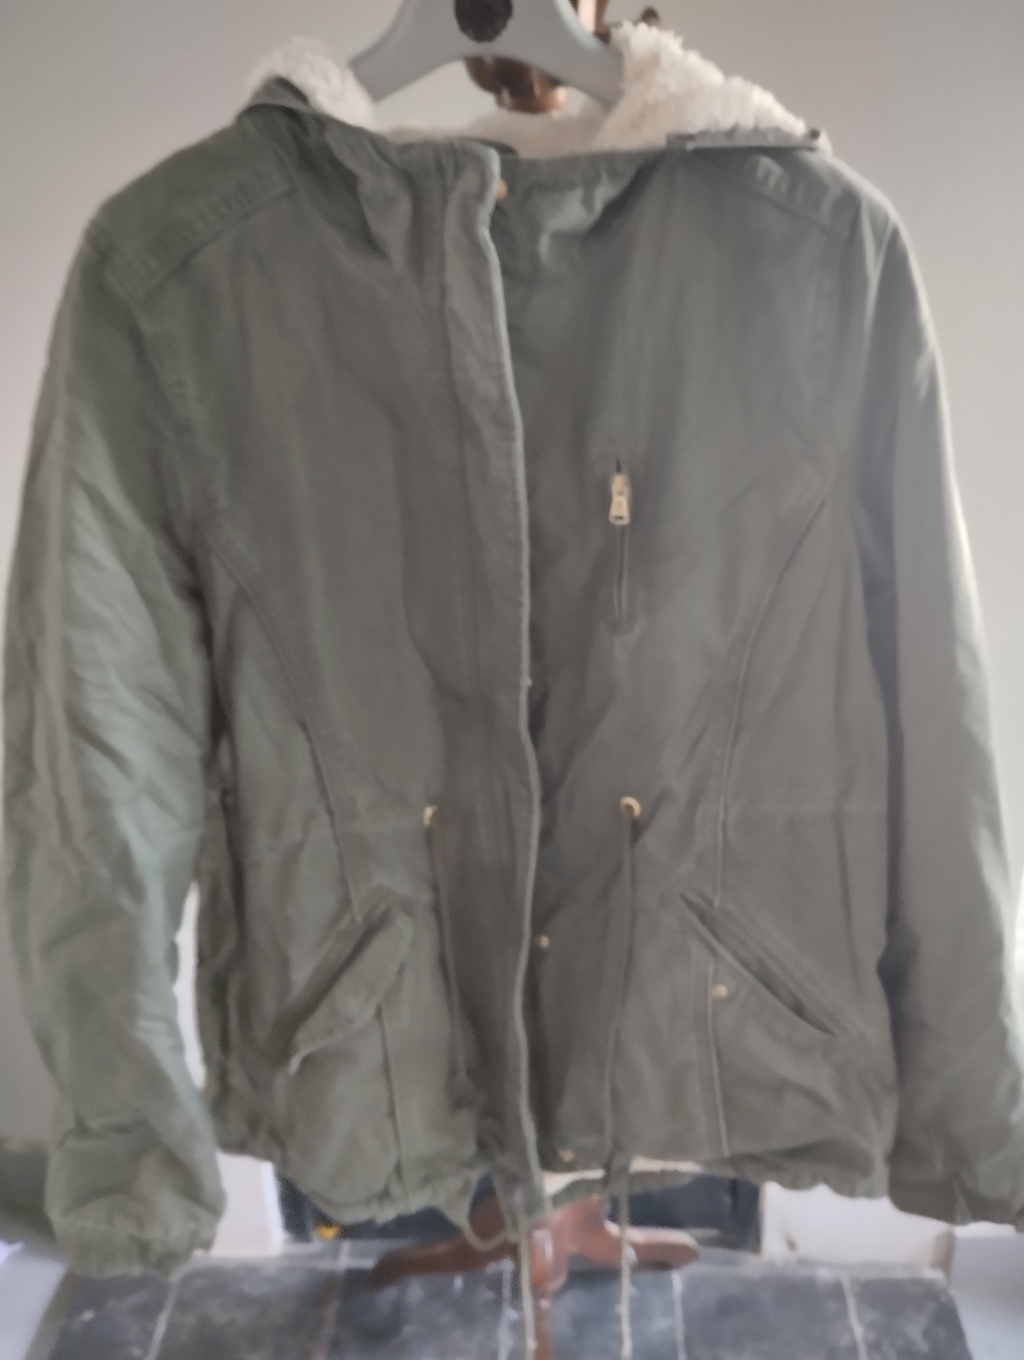 Jackets & Coats - Women`s Military jacket was sold for R200.00 on 7 Apr ...